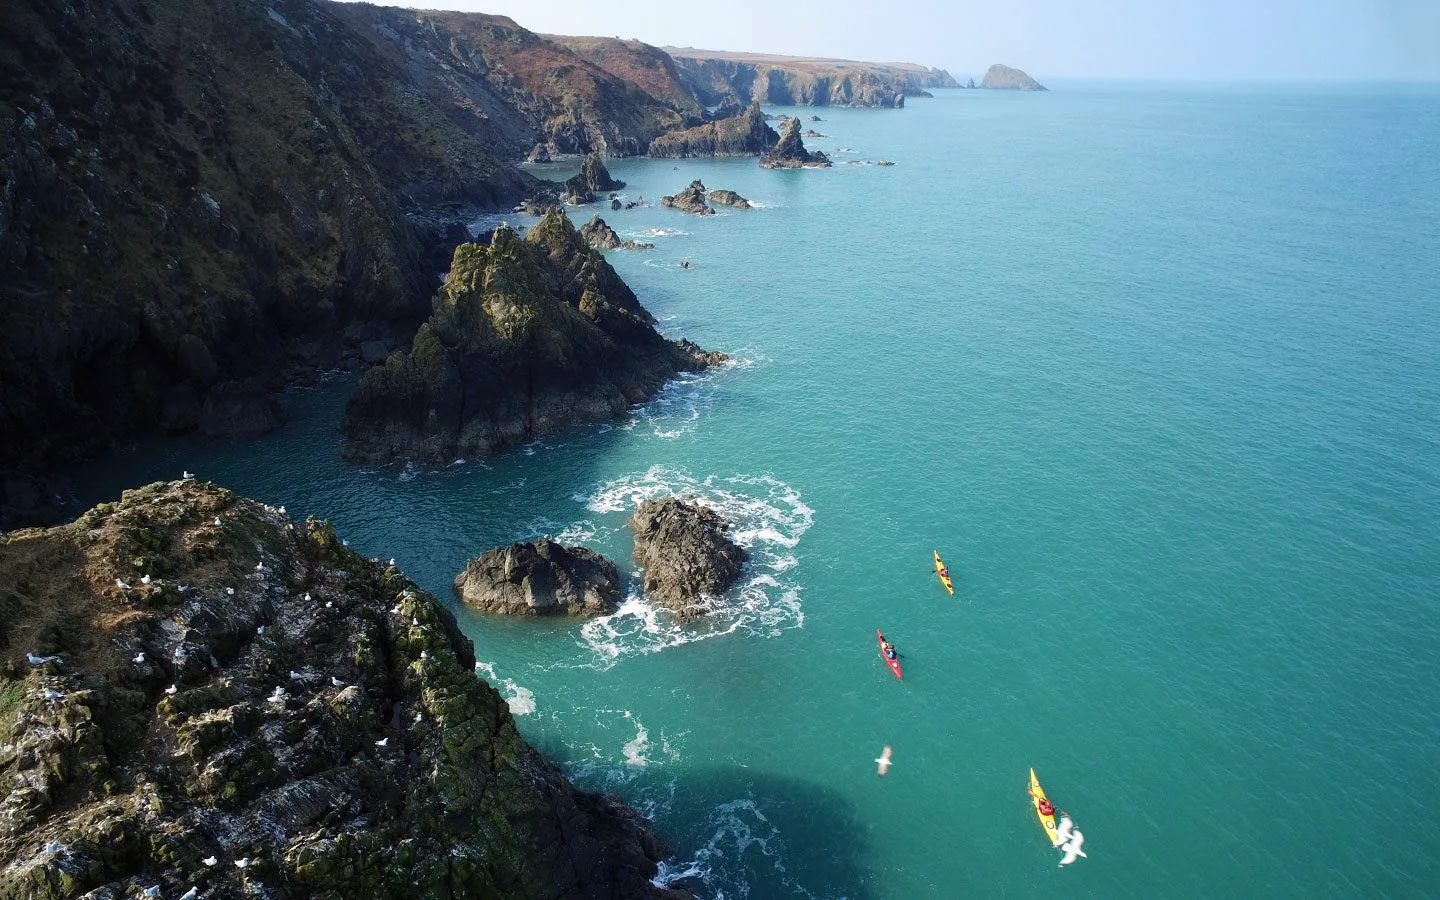 Kayaking the Pembrokeshire coast in Wales